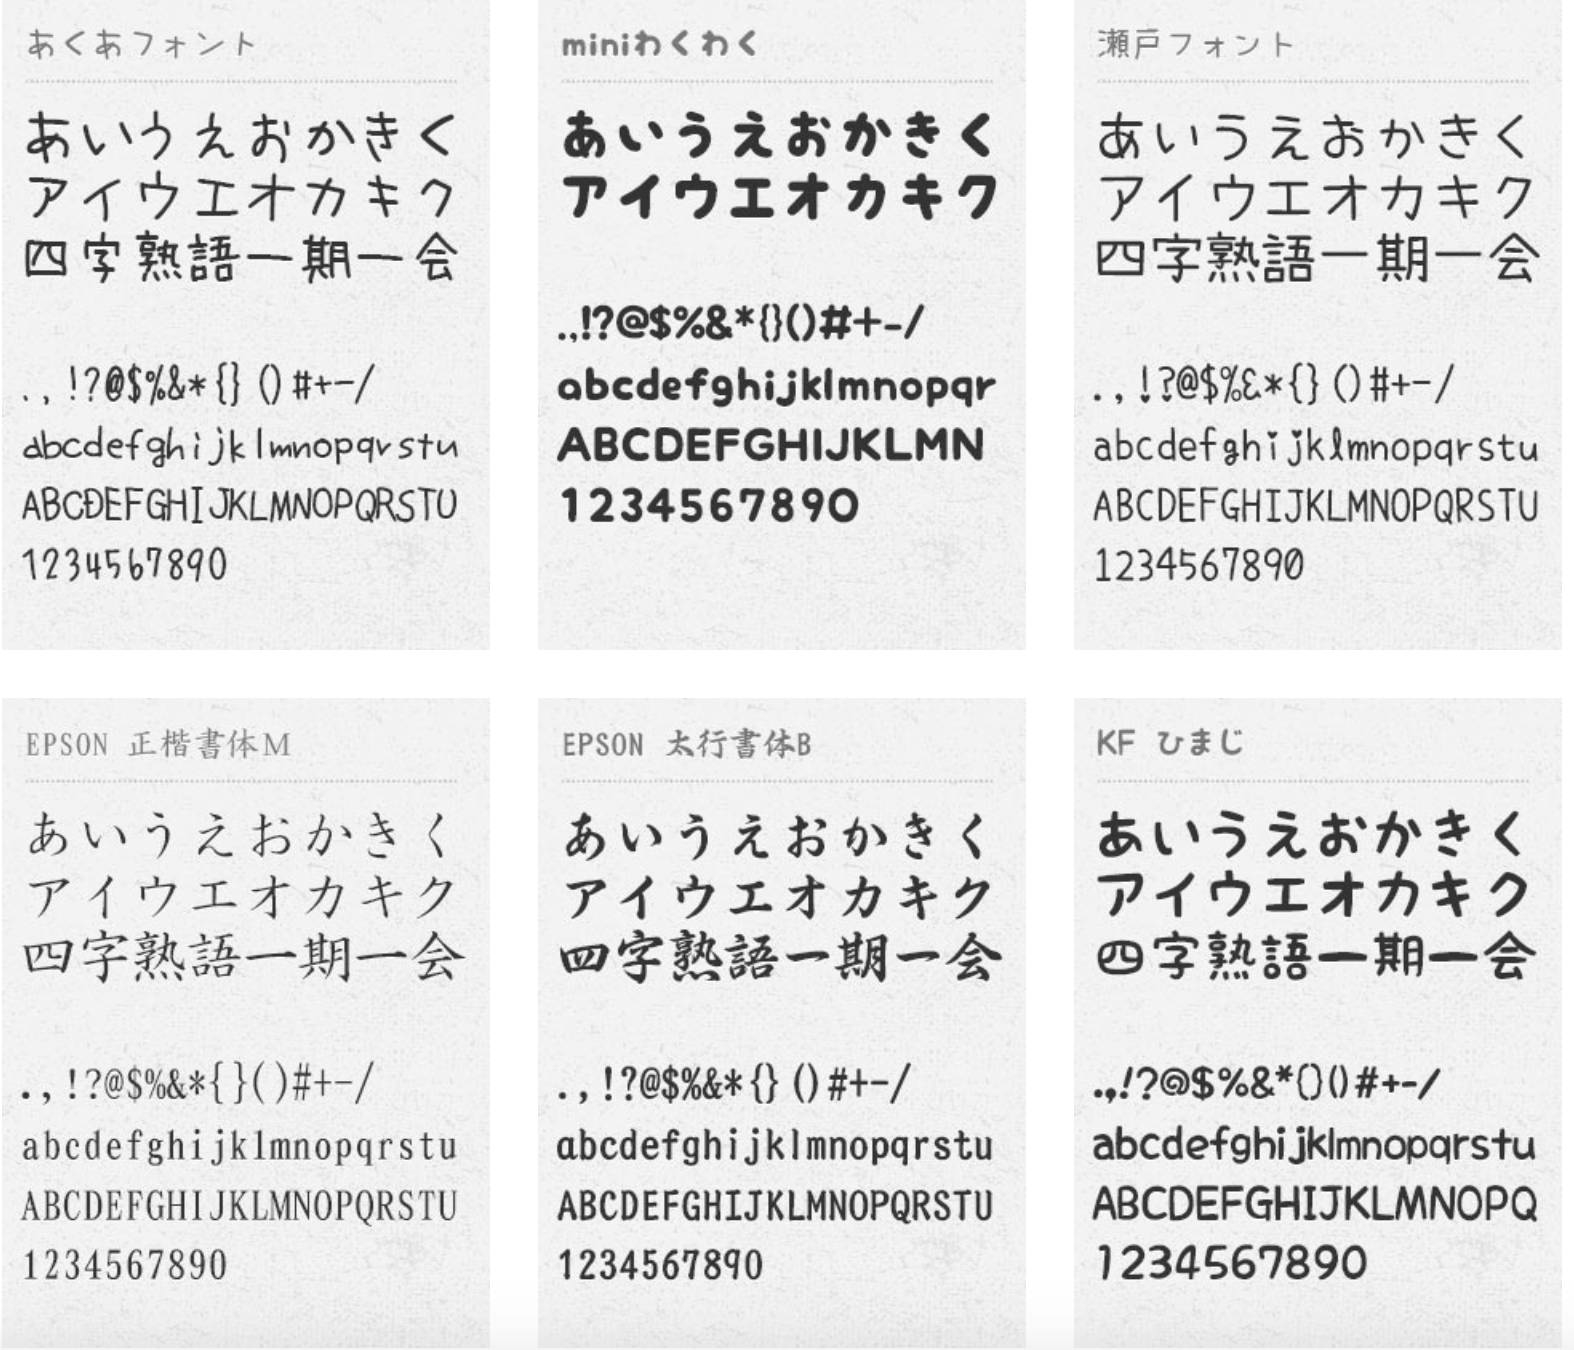 Design typography  OFL Open Font License Google Fonts Variable fonts Fontsquirrel FREE JAPANESE FONTS 100font what the font font style 免費字型 免費商用字型 字型庫 商用字型